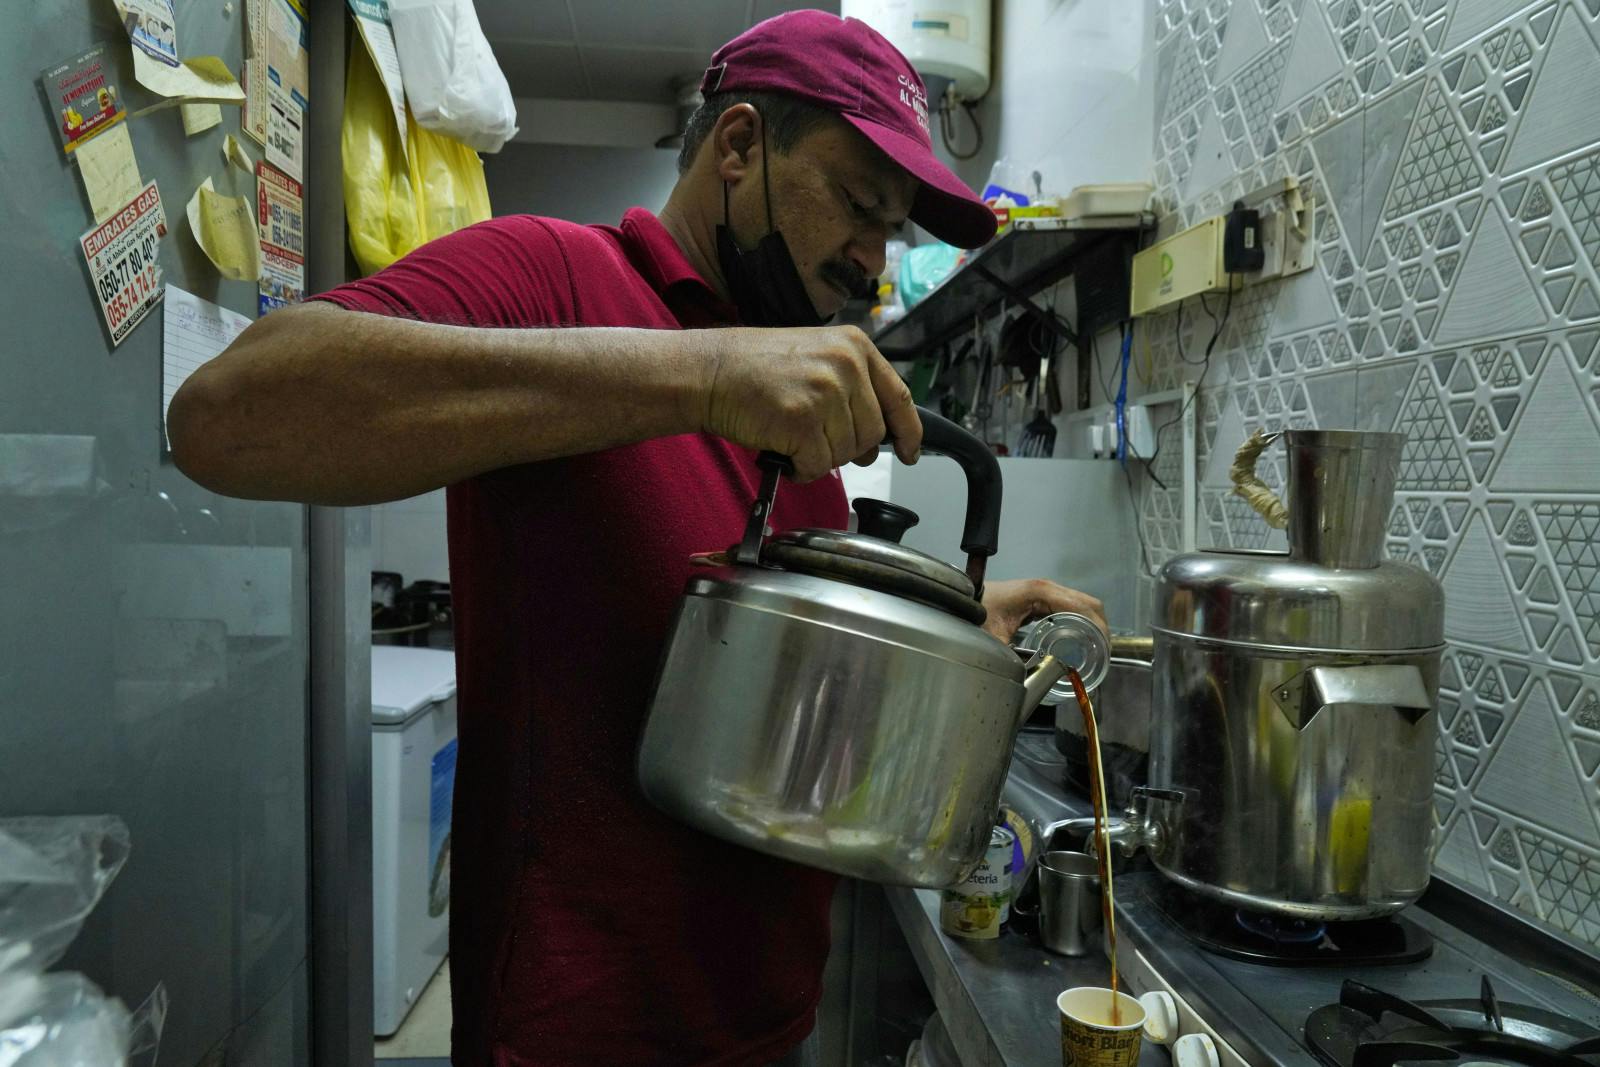 An Indian tea seller, Rafik, pours karak chai in Dubai, U.A.E., Aug. 24, 2022. Inflation has increased prices, a blow to migrant workers who depend on the drink (AP Photo/Jon Gambrell)